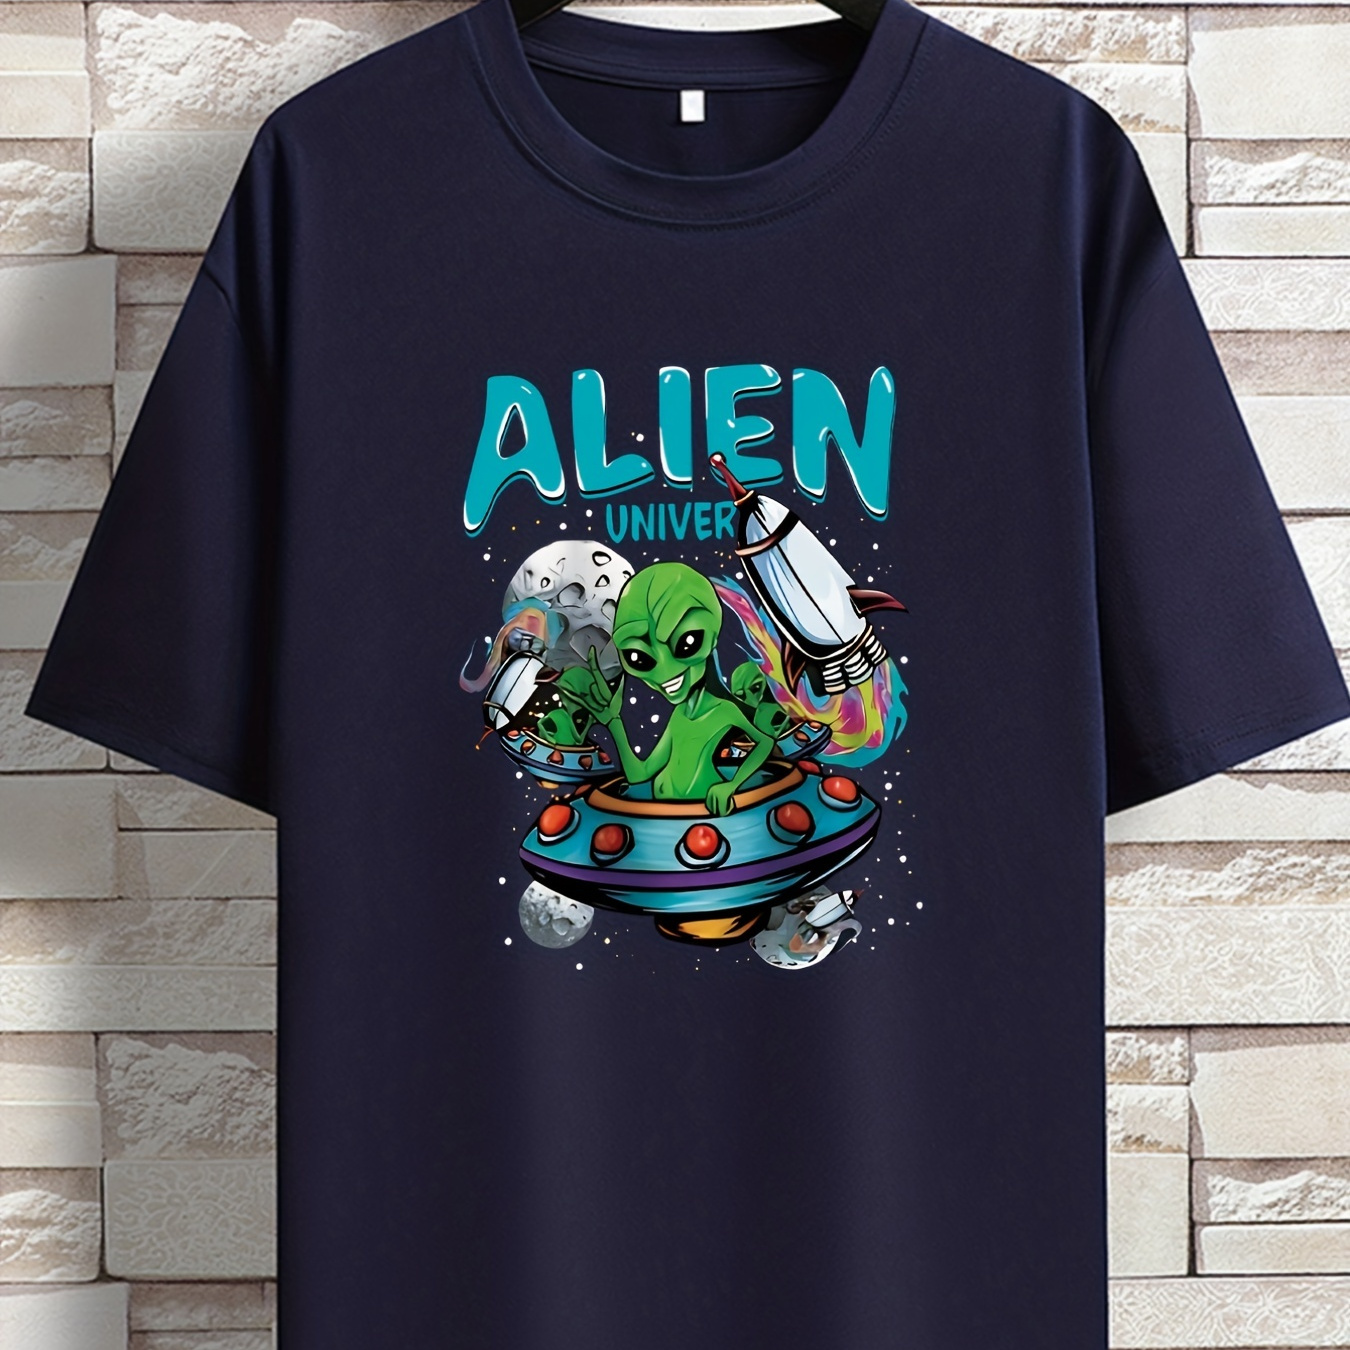 

Plus Size Men's Fashion Casual Alien And Ufo Print Short-sleeve Crew Neck T-shirt For Summer Sports, Basic Tee For Males